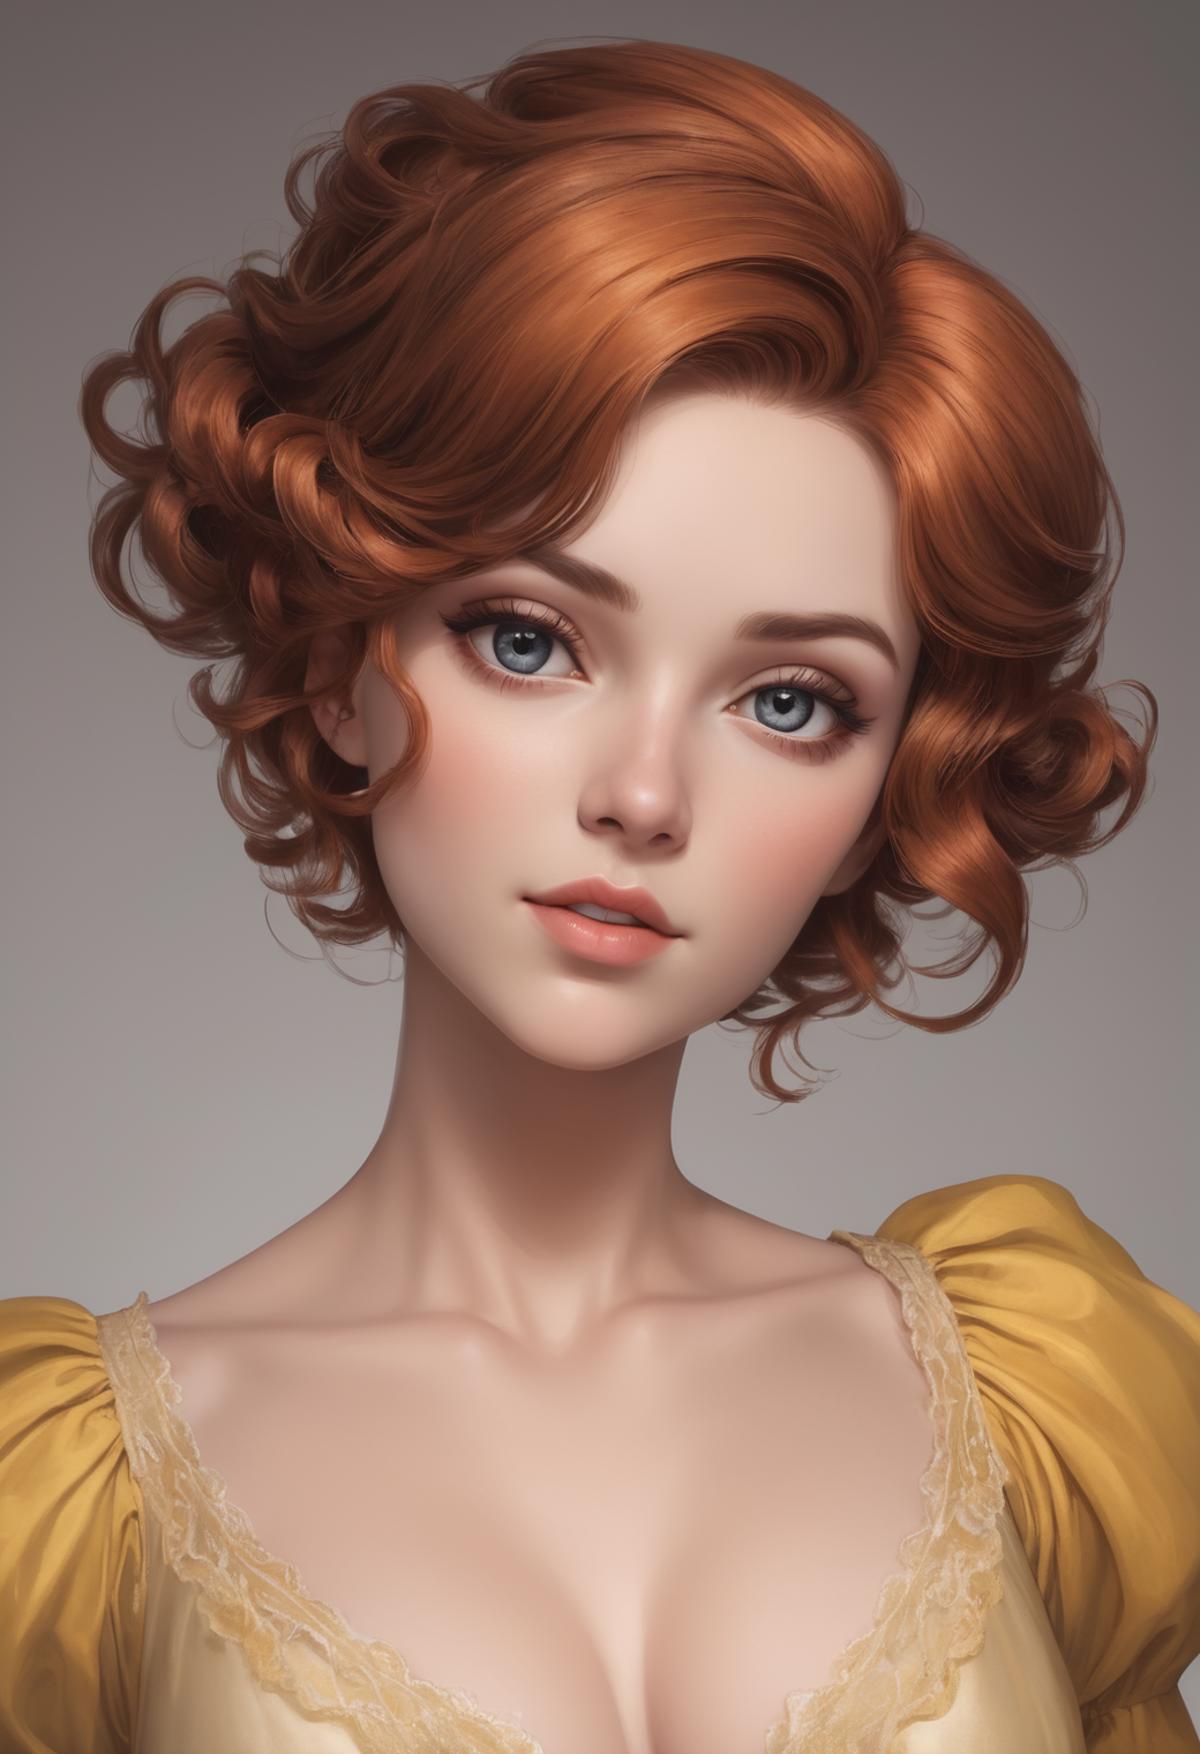 The image features a beautiful, long-haired, red-haired female character with blue eyes. She is wearing a yellow dress and is posed in a profile view, making her appear elegant and poised. The character's features, such as her nose, lips, and eyes, are carefully crafted, giving her a realistic and captivating appearance.